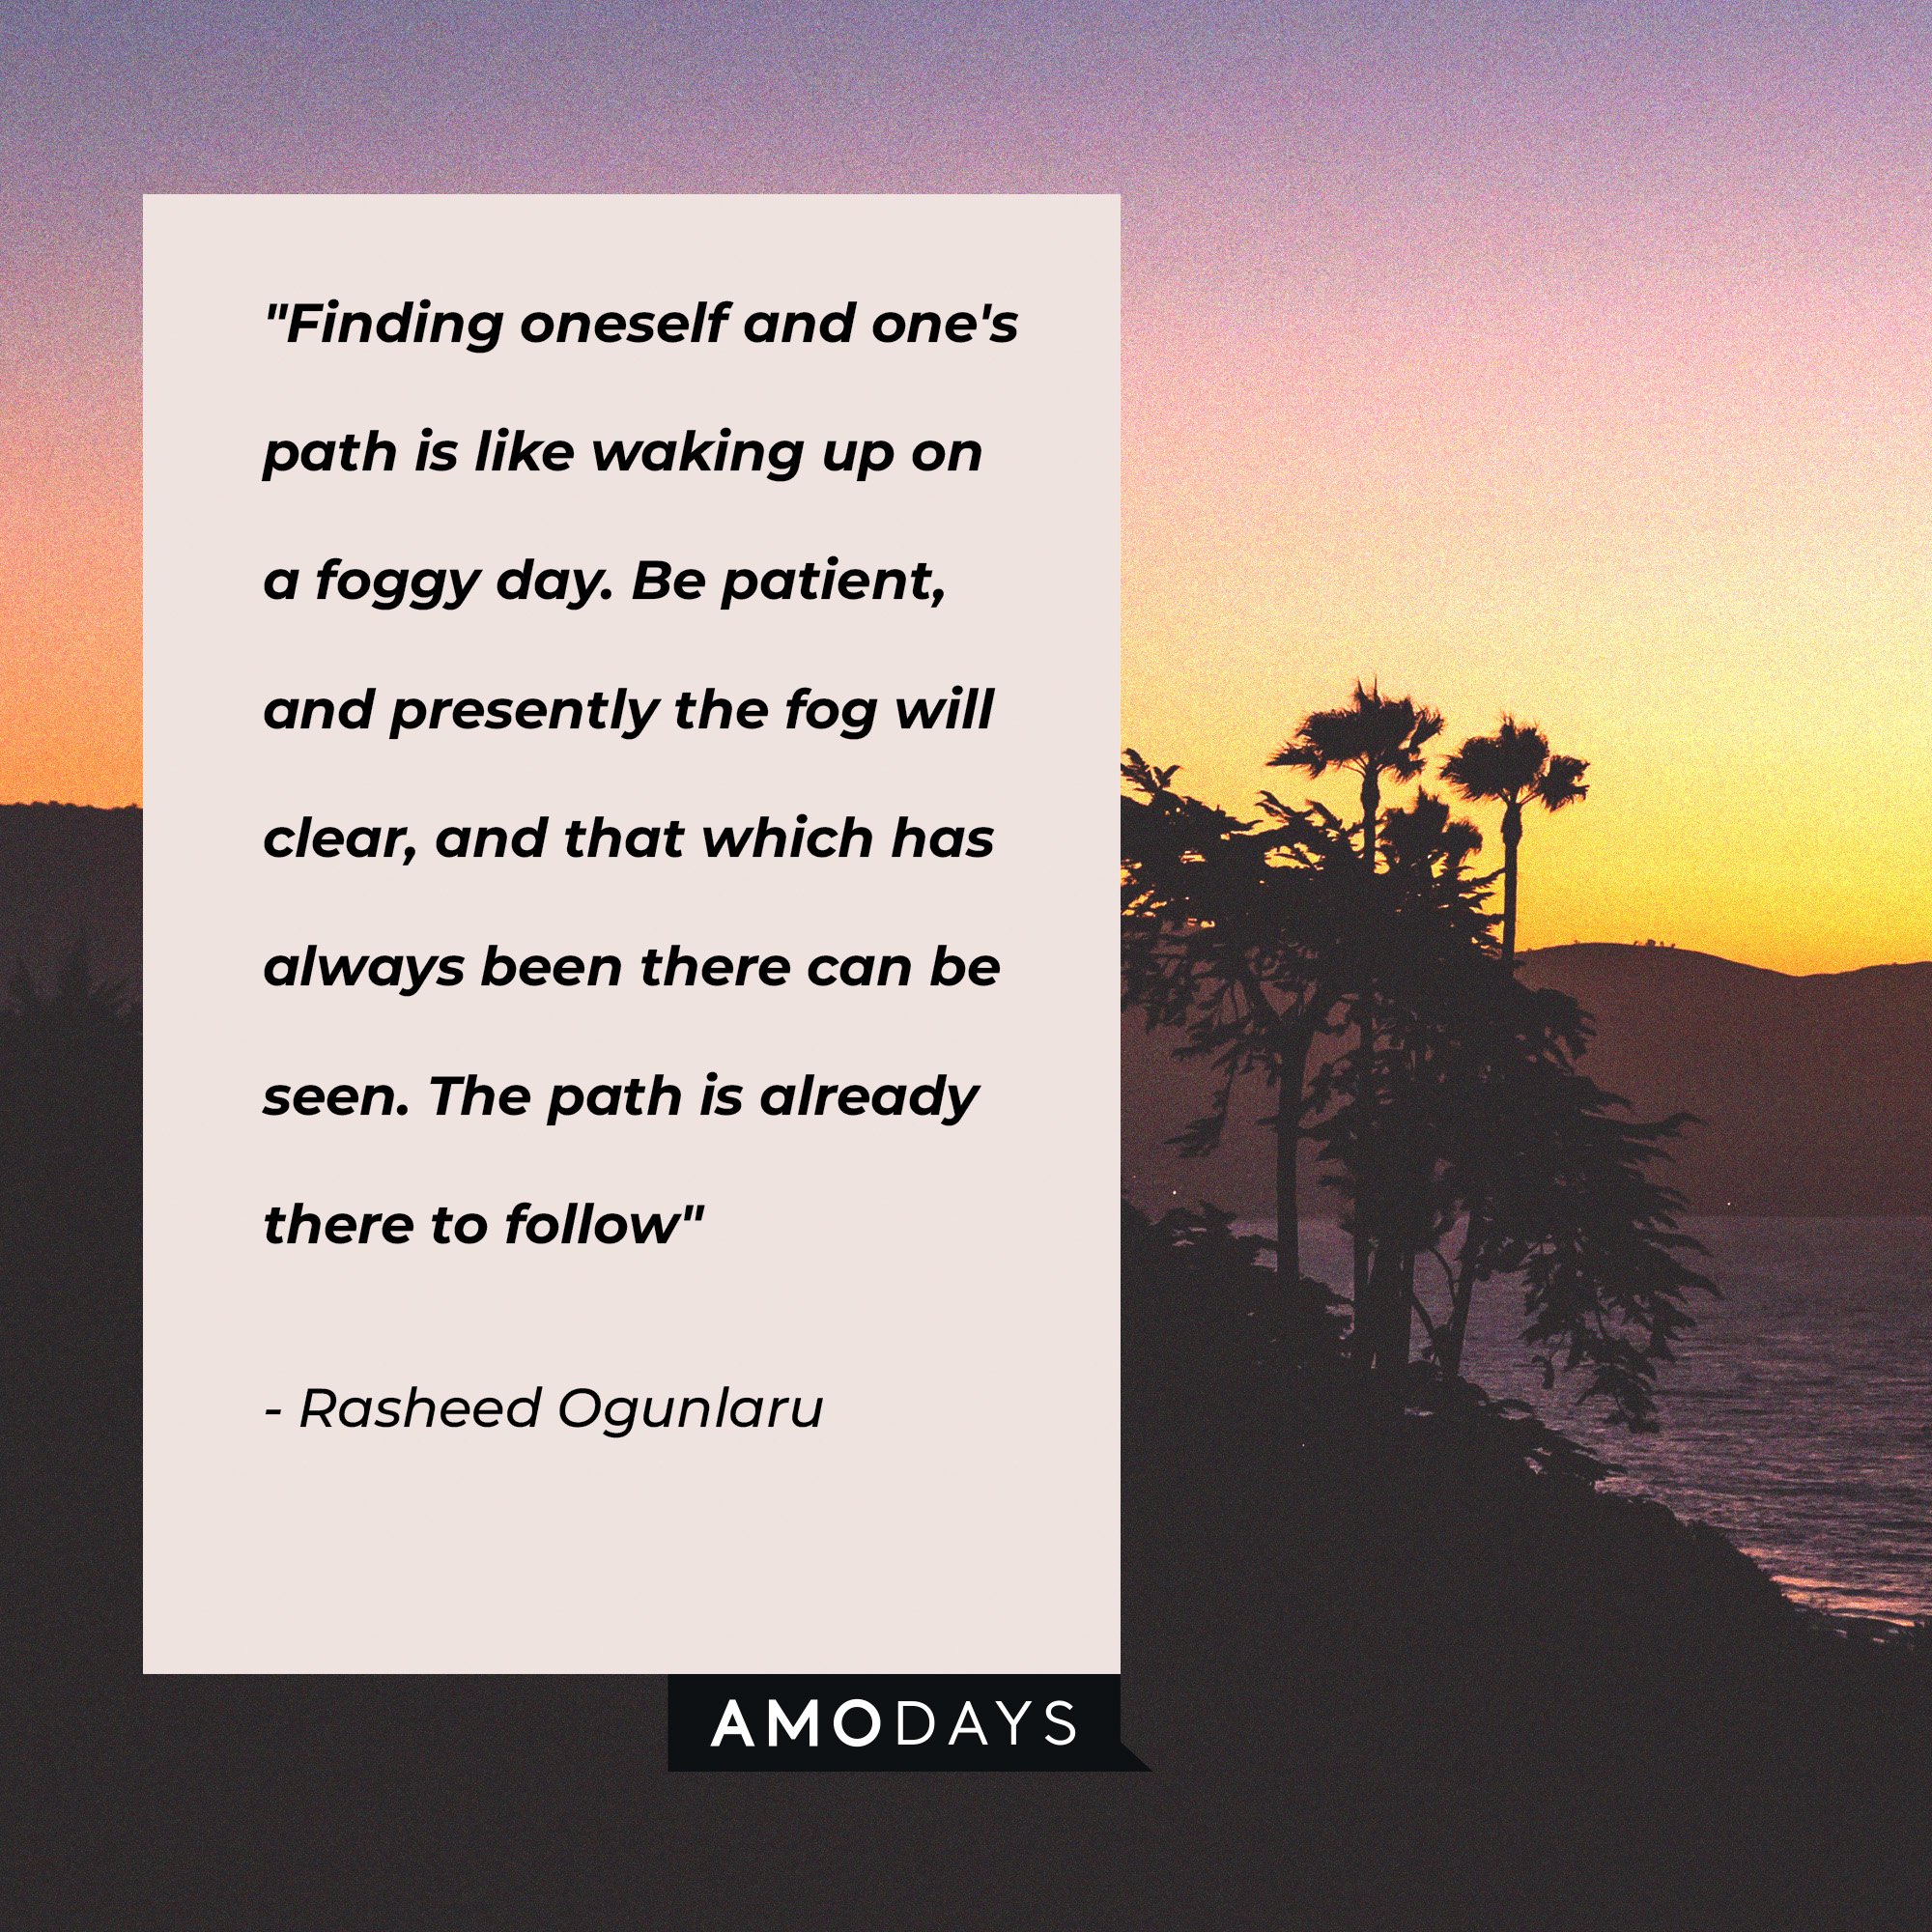 Rasheed Ogunlaru's quote: “Finding oneself and one’s path is like waking up on a foggy day. Be patient, and presently the fog will clear and that which has always been there can be seen. The path is already there to follow.”  | Image: AmoDays